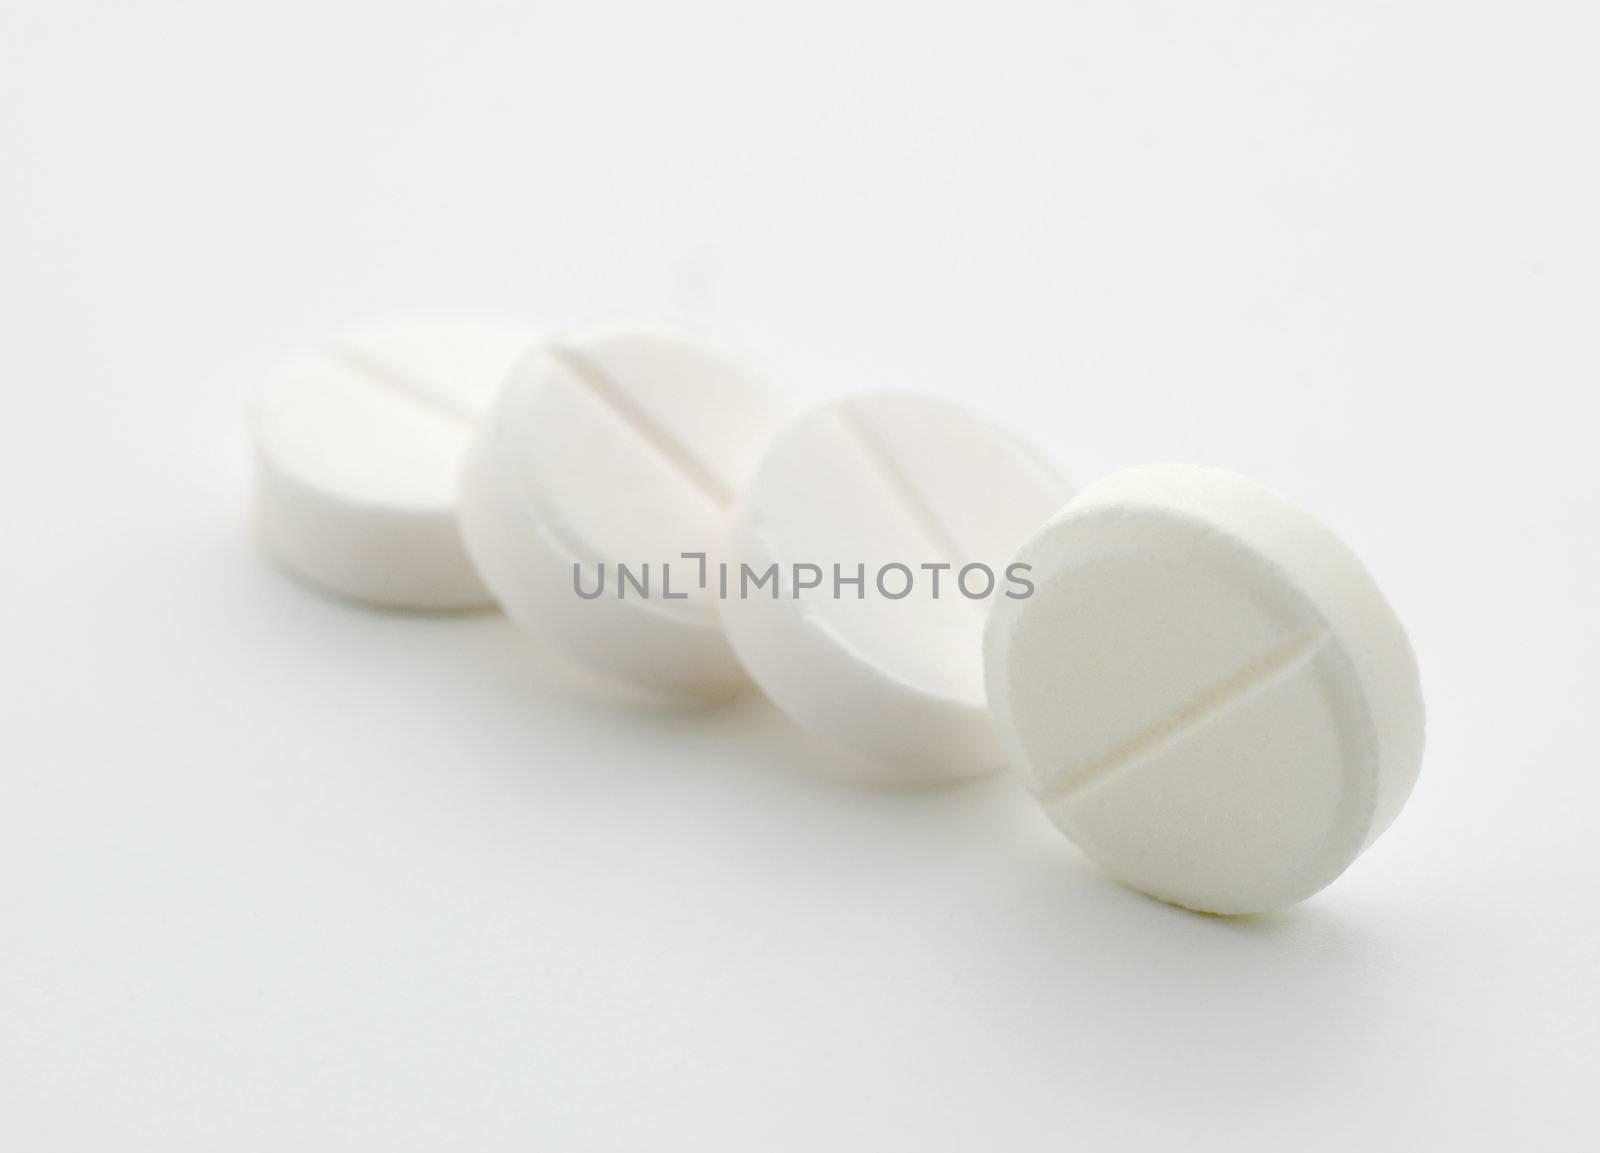 Tablets. A medical preparation in white colot